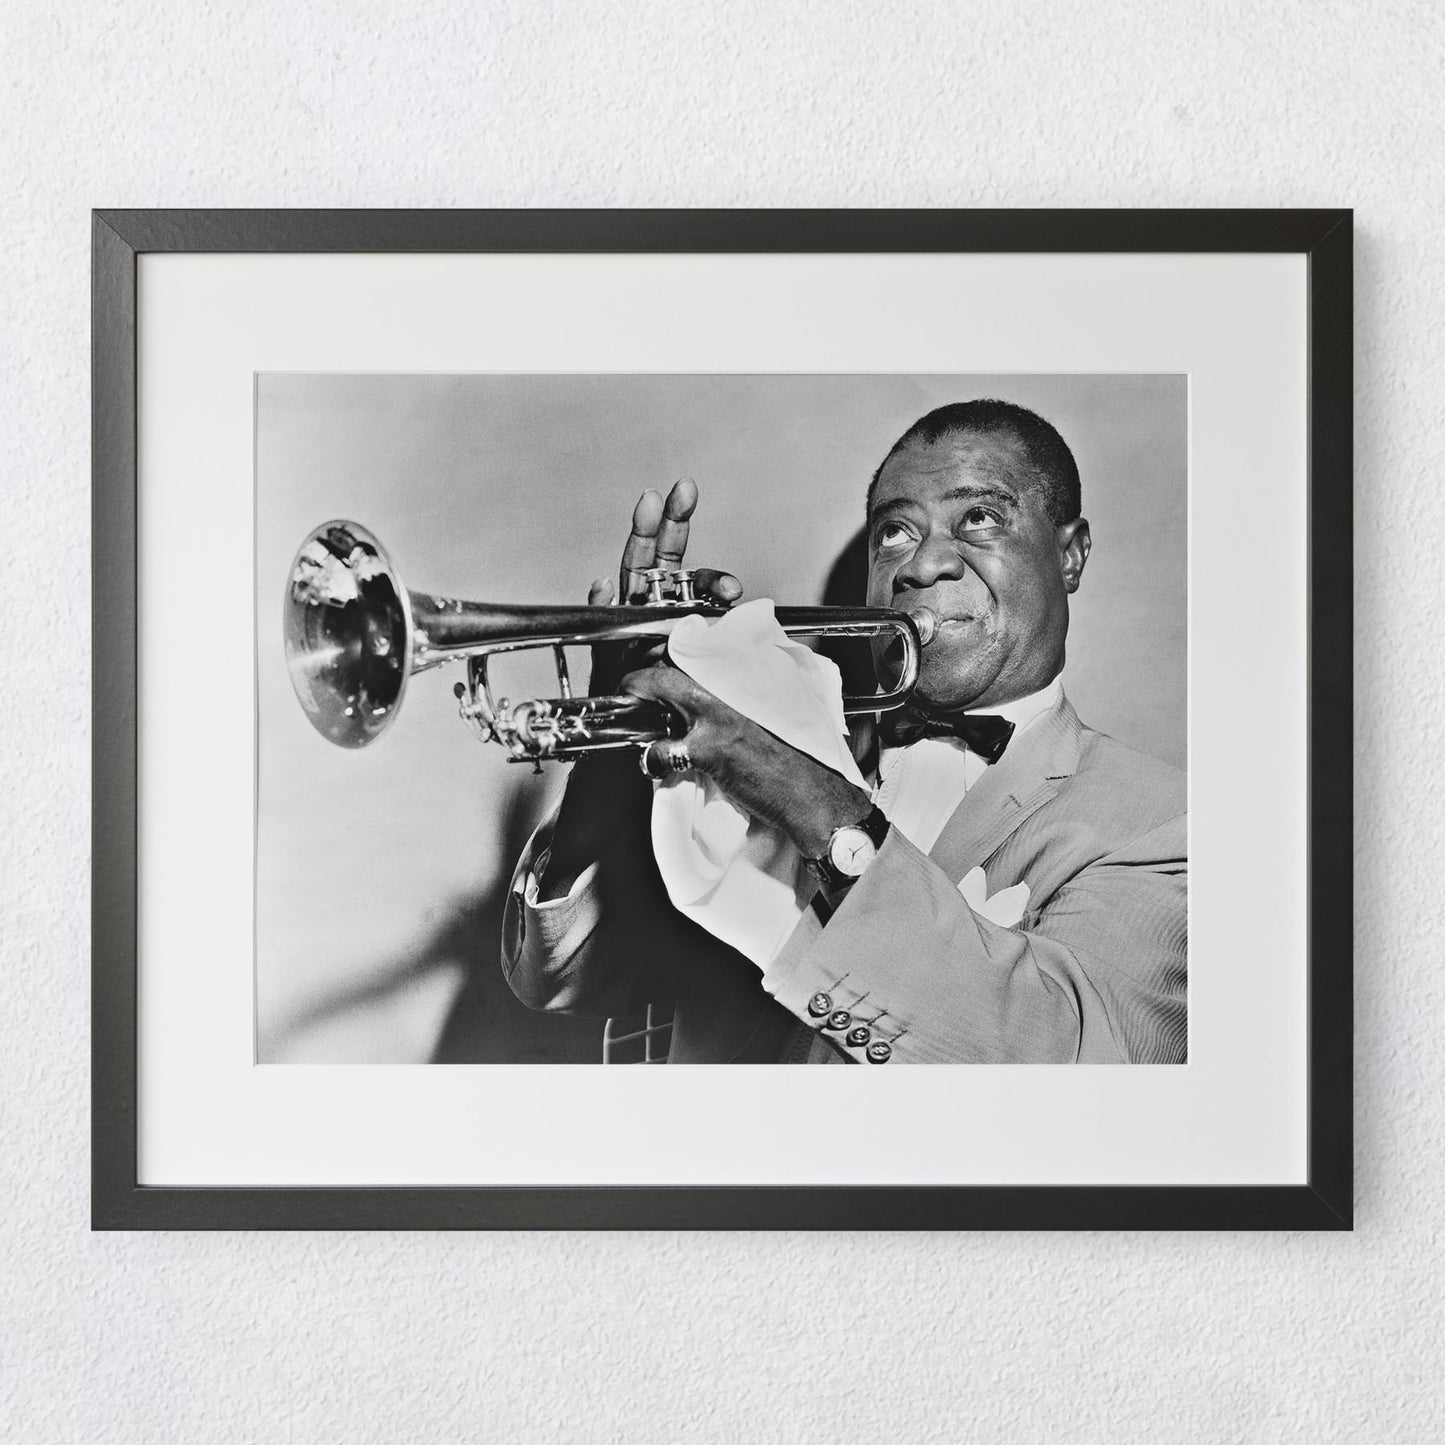 Louis Armstrong playing the trumpet